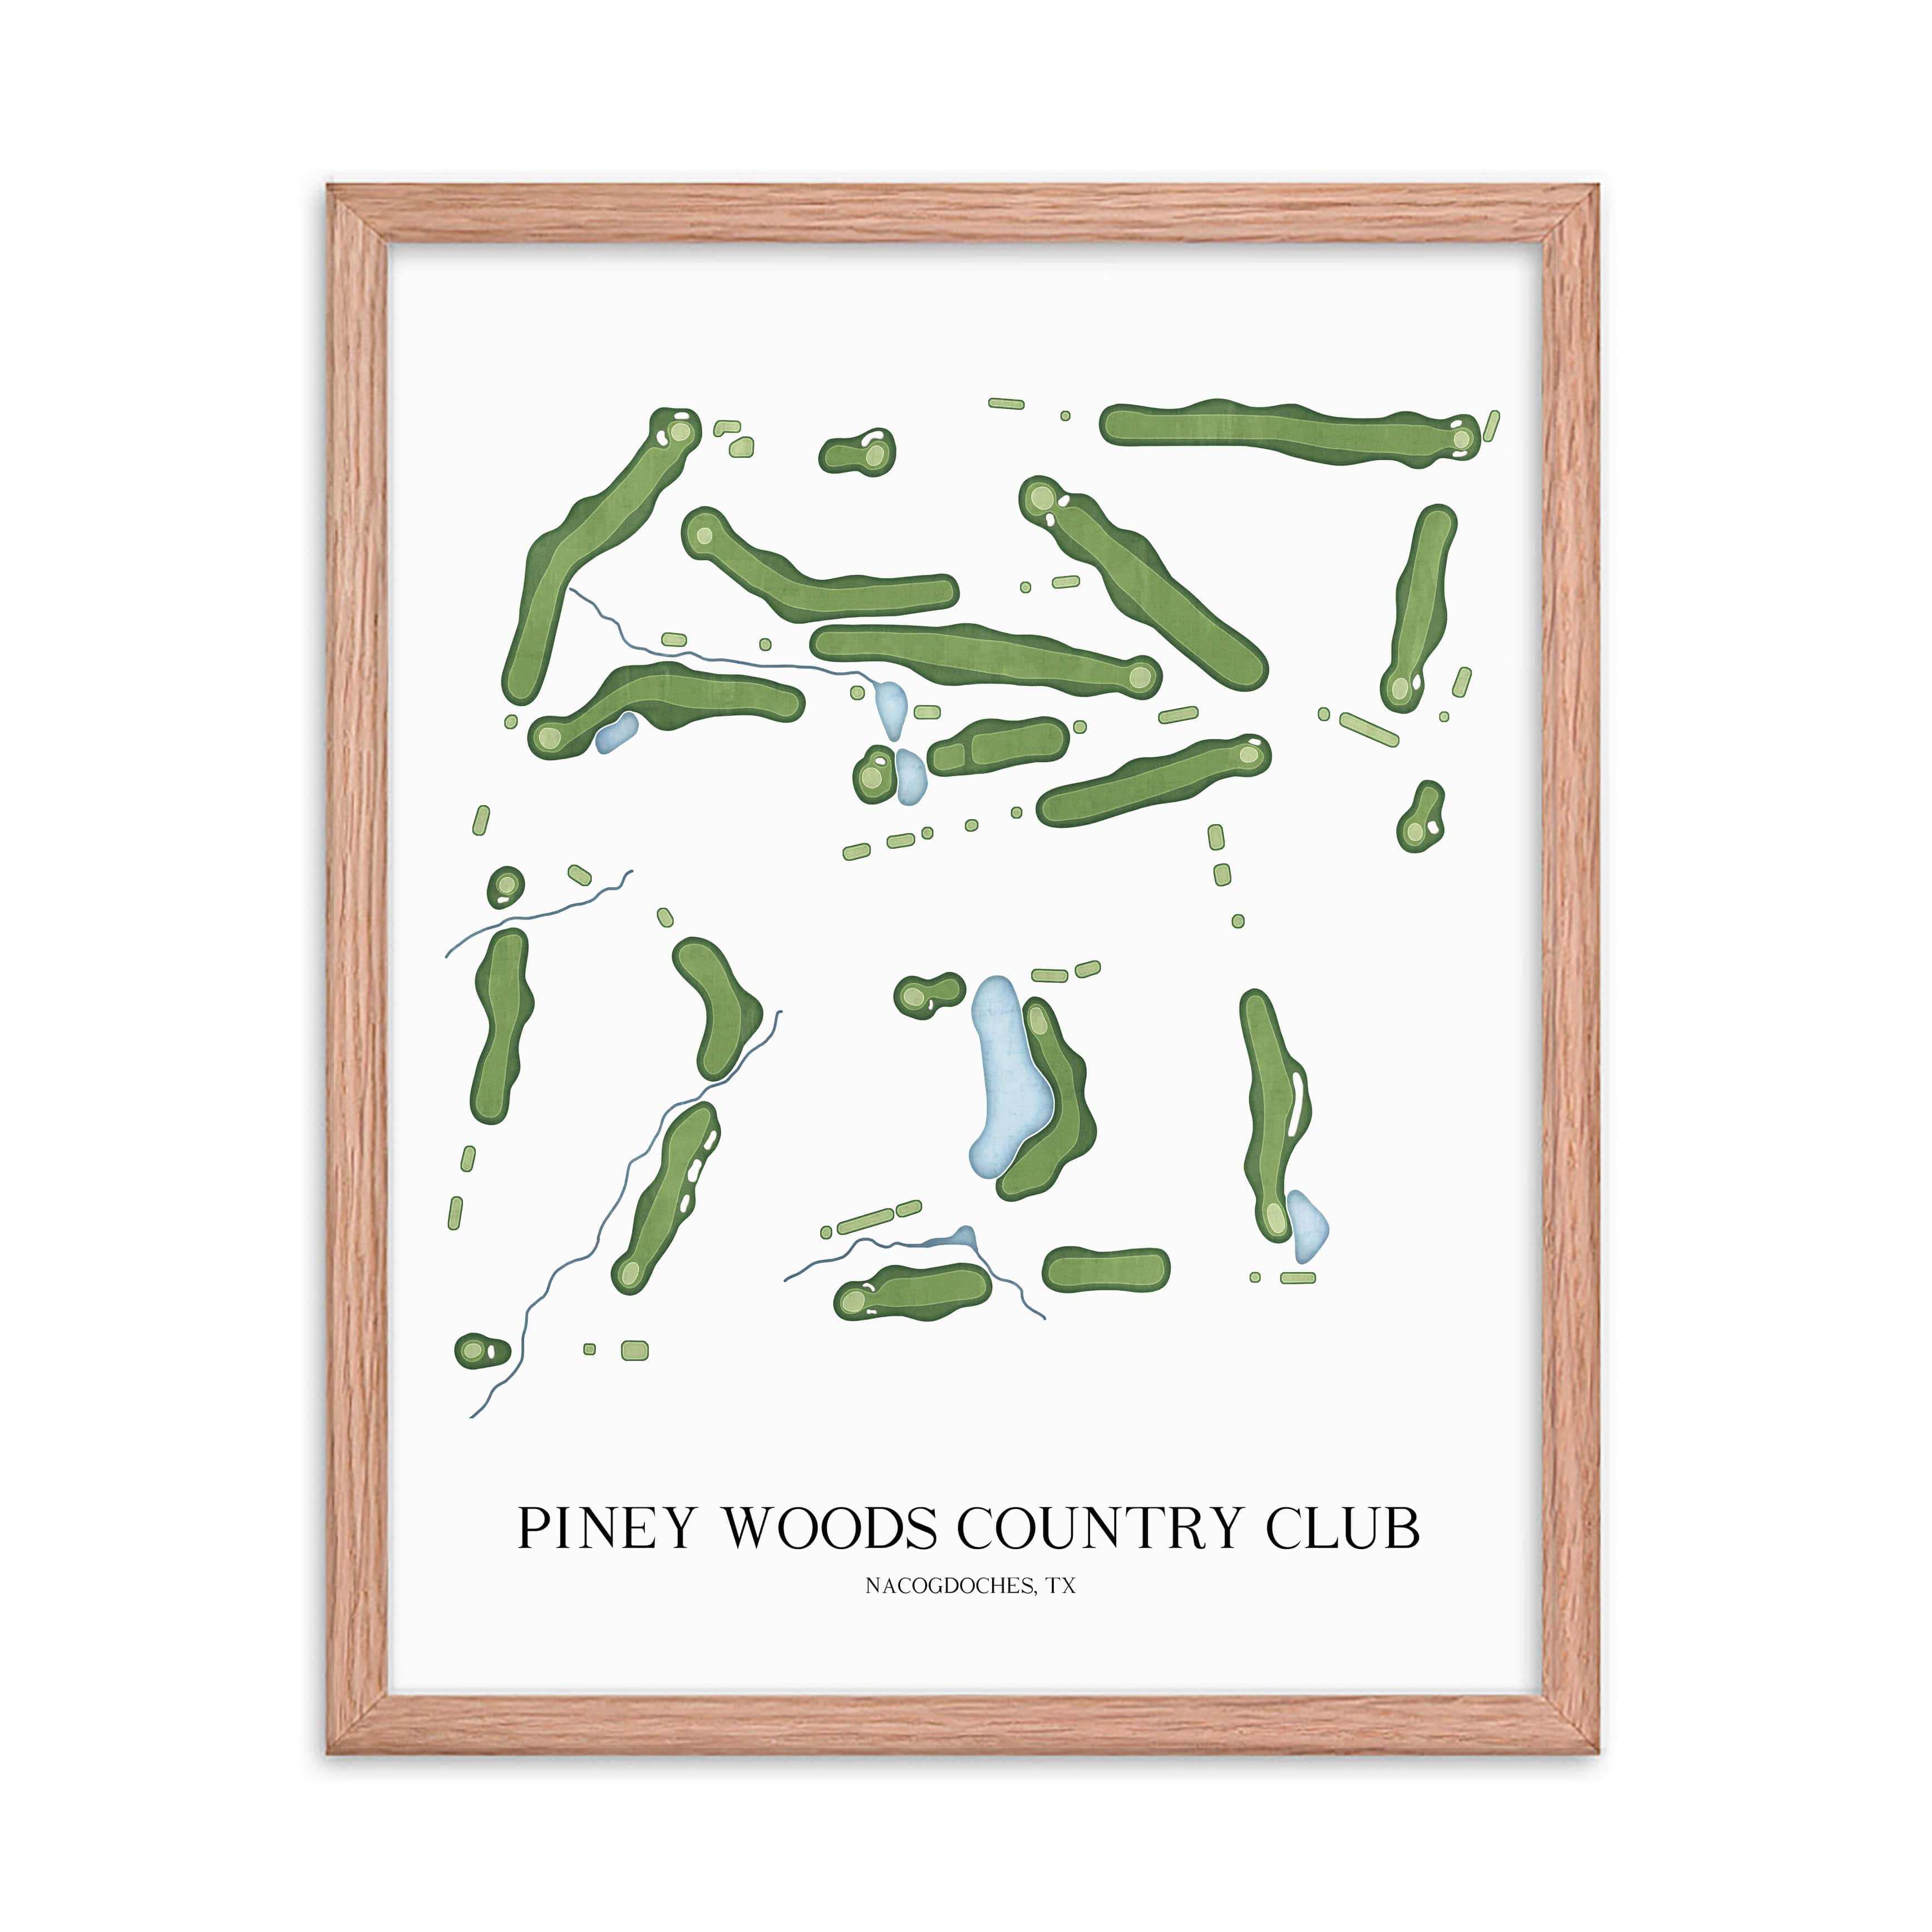 The 19th Hole Golf Shop - Golf Course Prints -  Piney Woods Country Club Golf Course Map